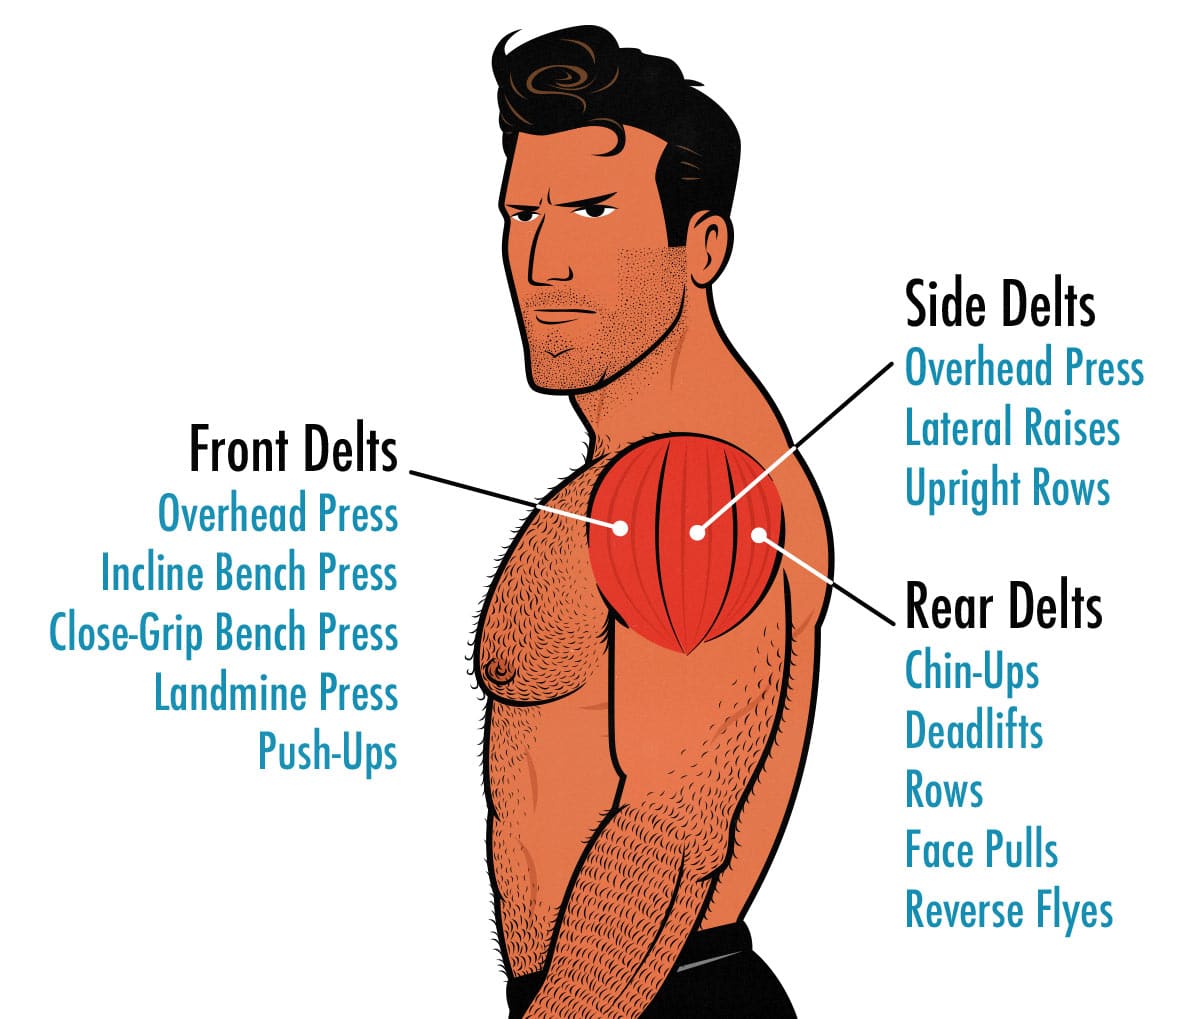 Diagram showing shoulder muscle anatomy and exercises for the front delts, side delts, and rear delts.